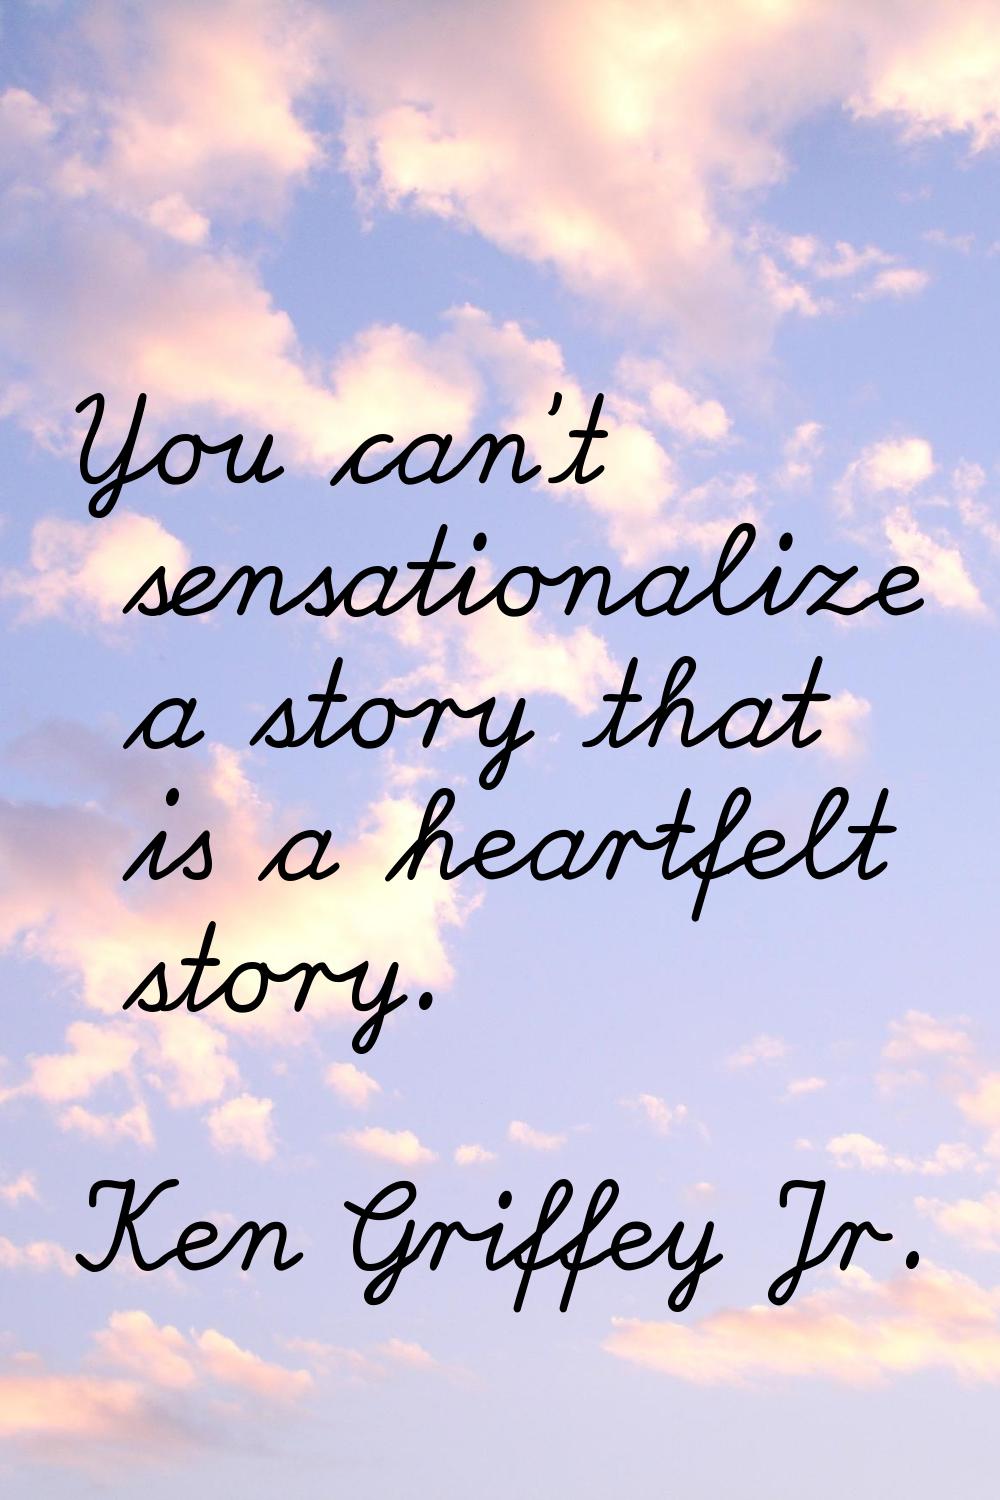 You can't sensationalize a story that is a heartfelt story.